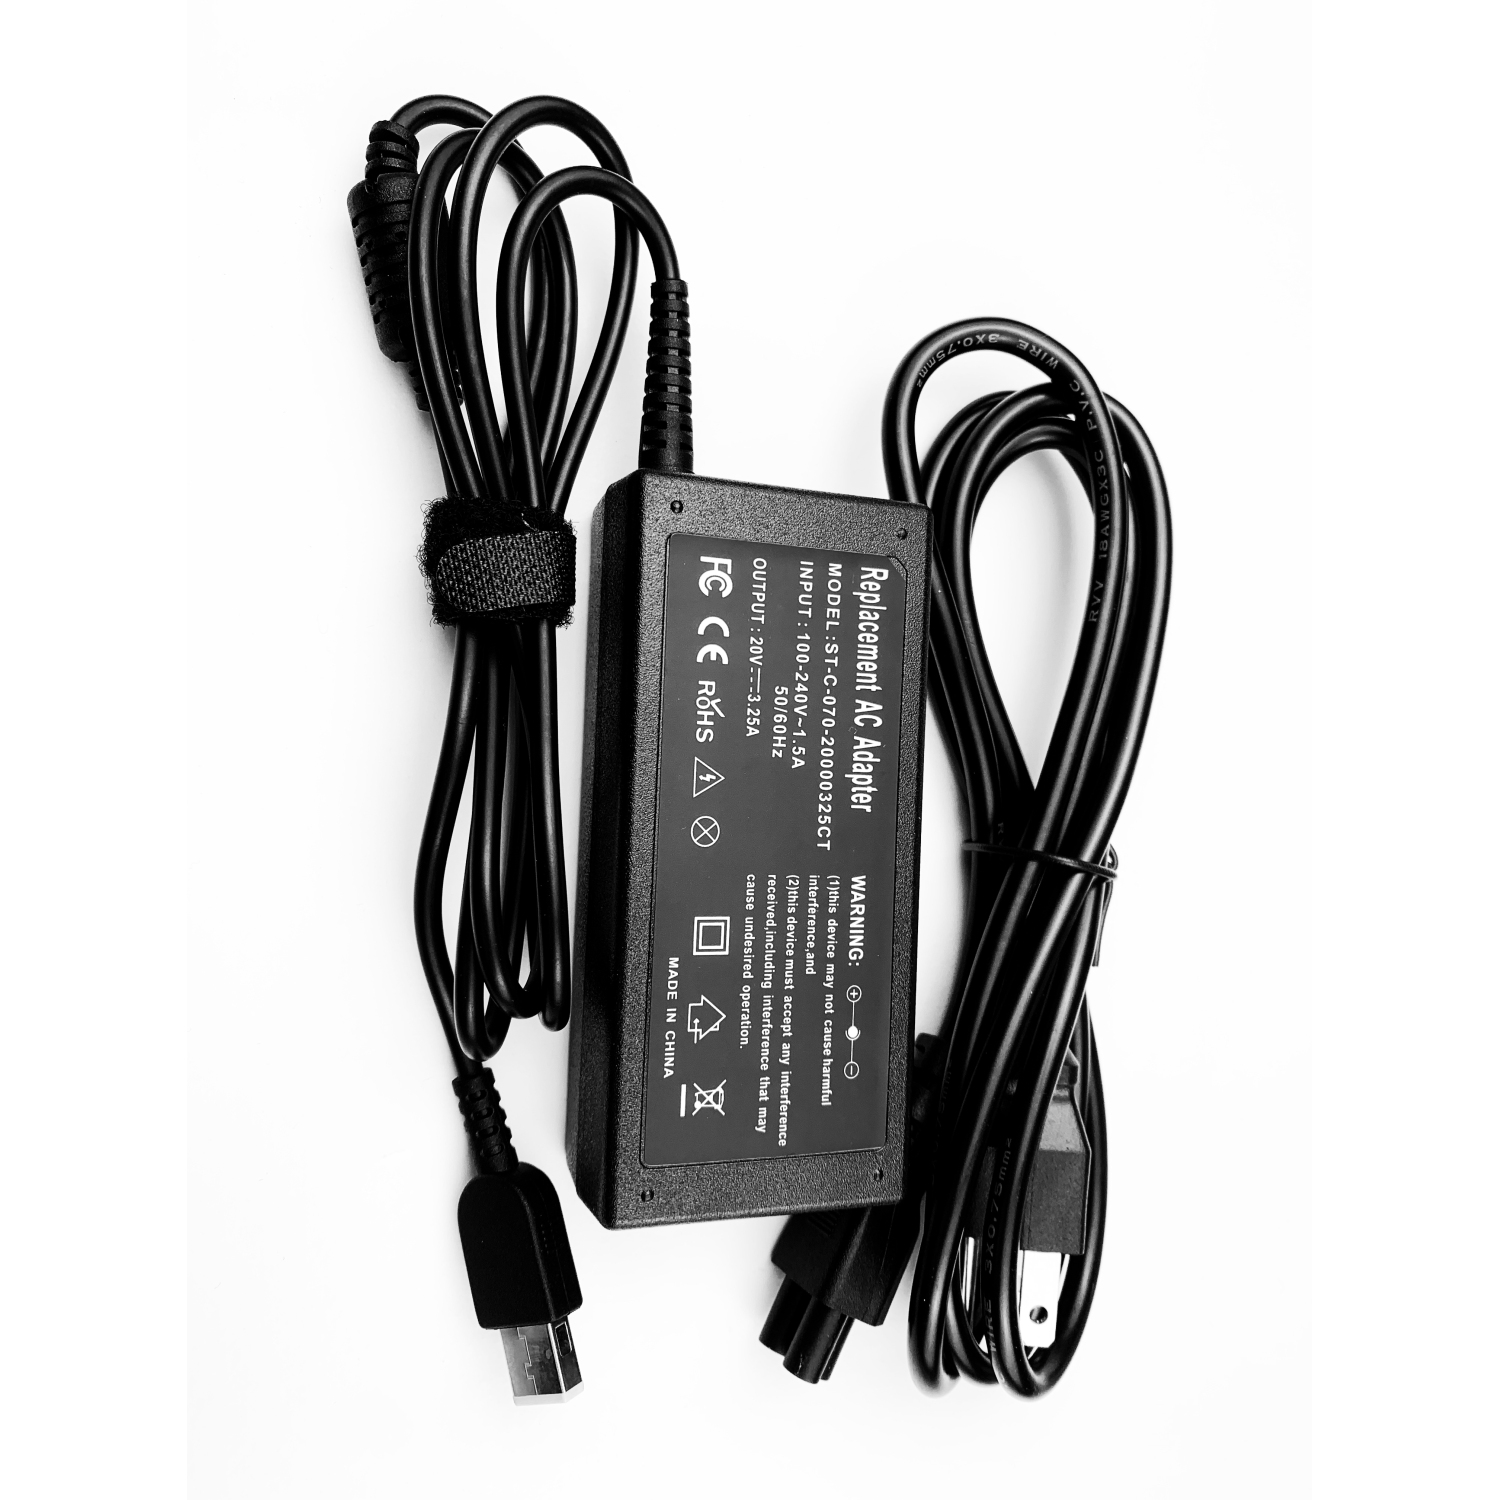 20V 3.25A yellow square tip 65W AC adapter power cord charger for Lenovo P/N 54Y8970 Yoga Tablet 2 8""